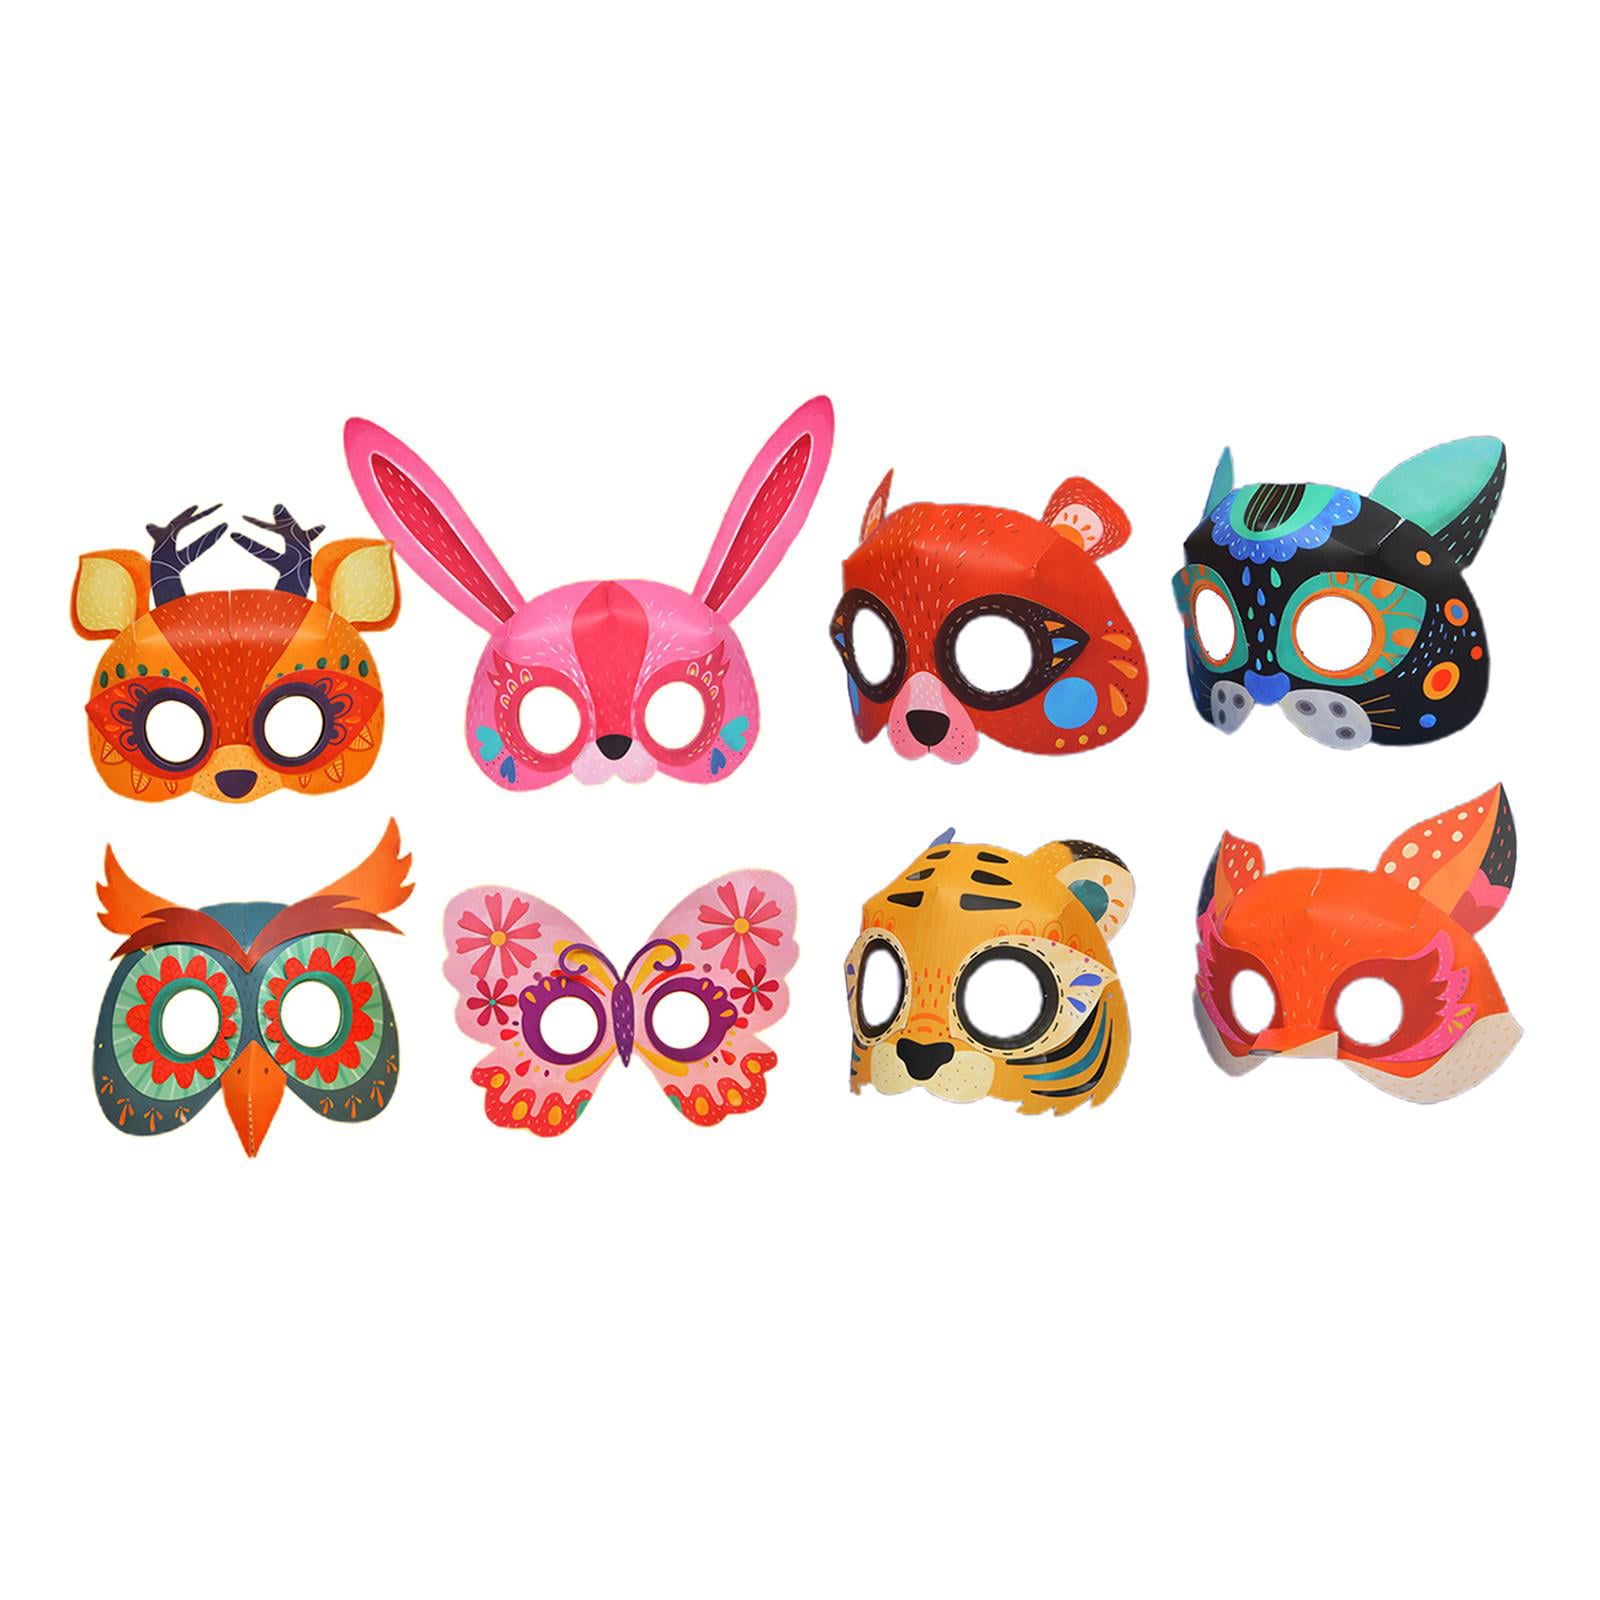 DIY Magic Rainbow Mask for Kids Jungle Animal Party Favors WATINC 32Pcs Animal Scratch Paper Masks Craft Pack for Boys Girls 16 Styles with Elastic Bands and Wood Stylus Birthday Gifts 